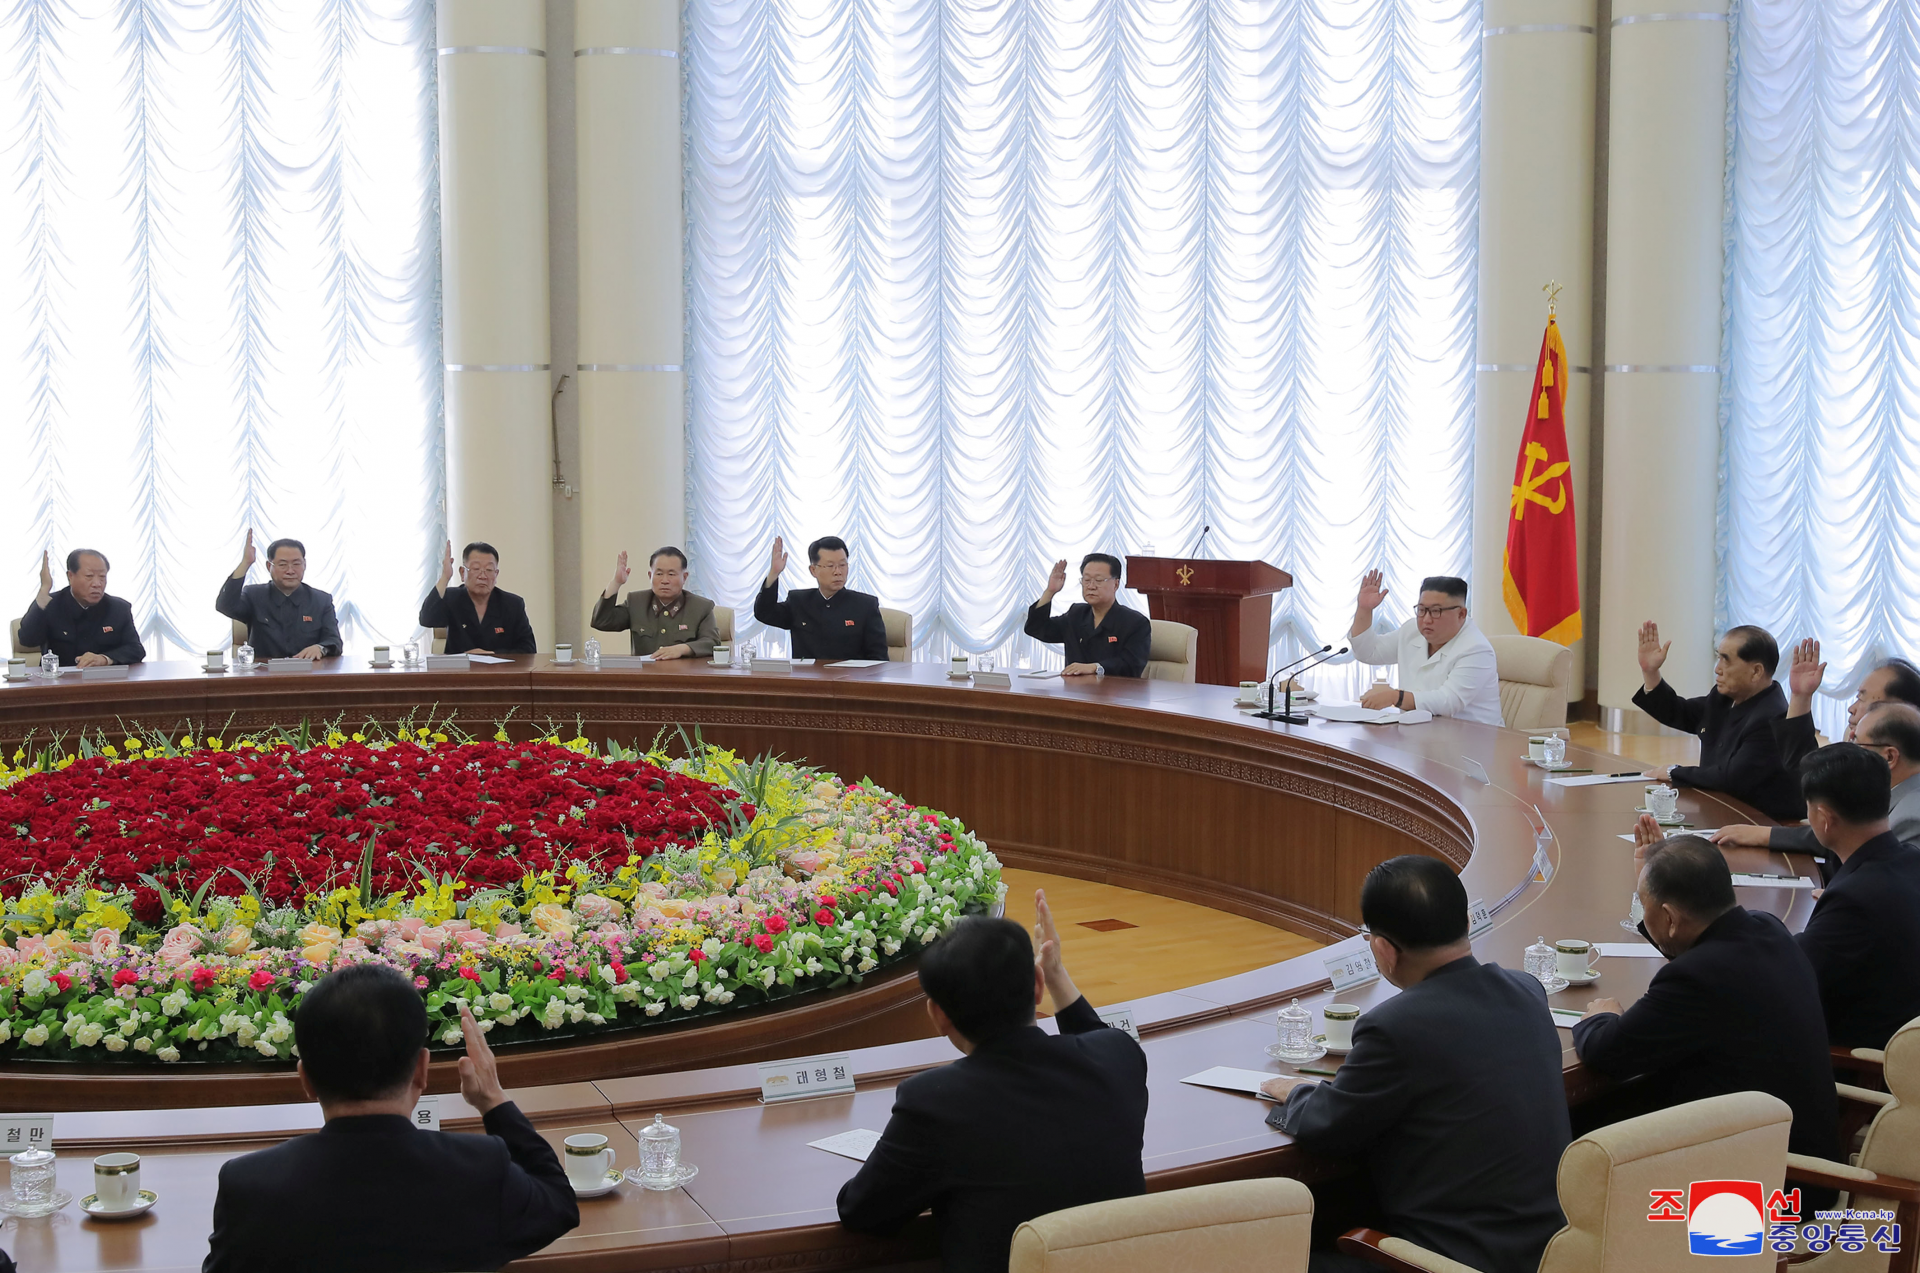 Kim jong-un, in white, leading a meeting photo released by the north korean state media last week 